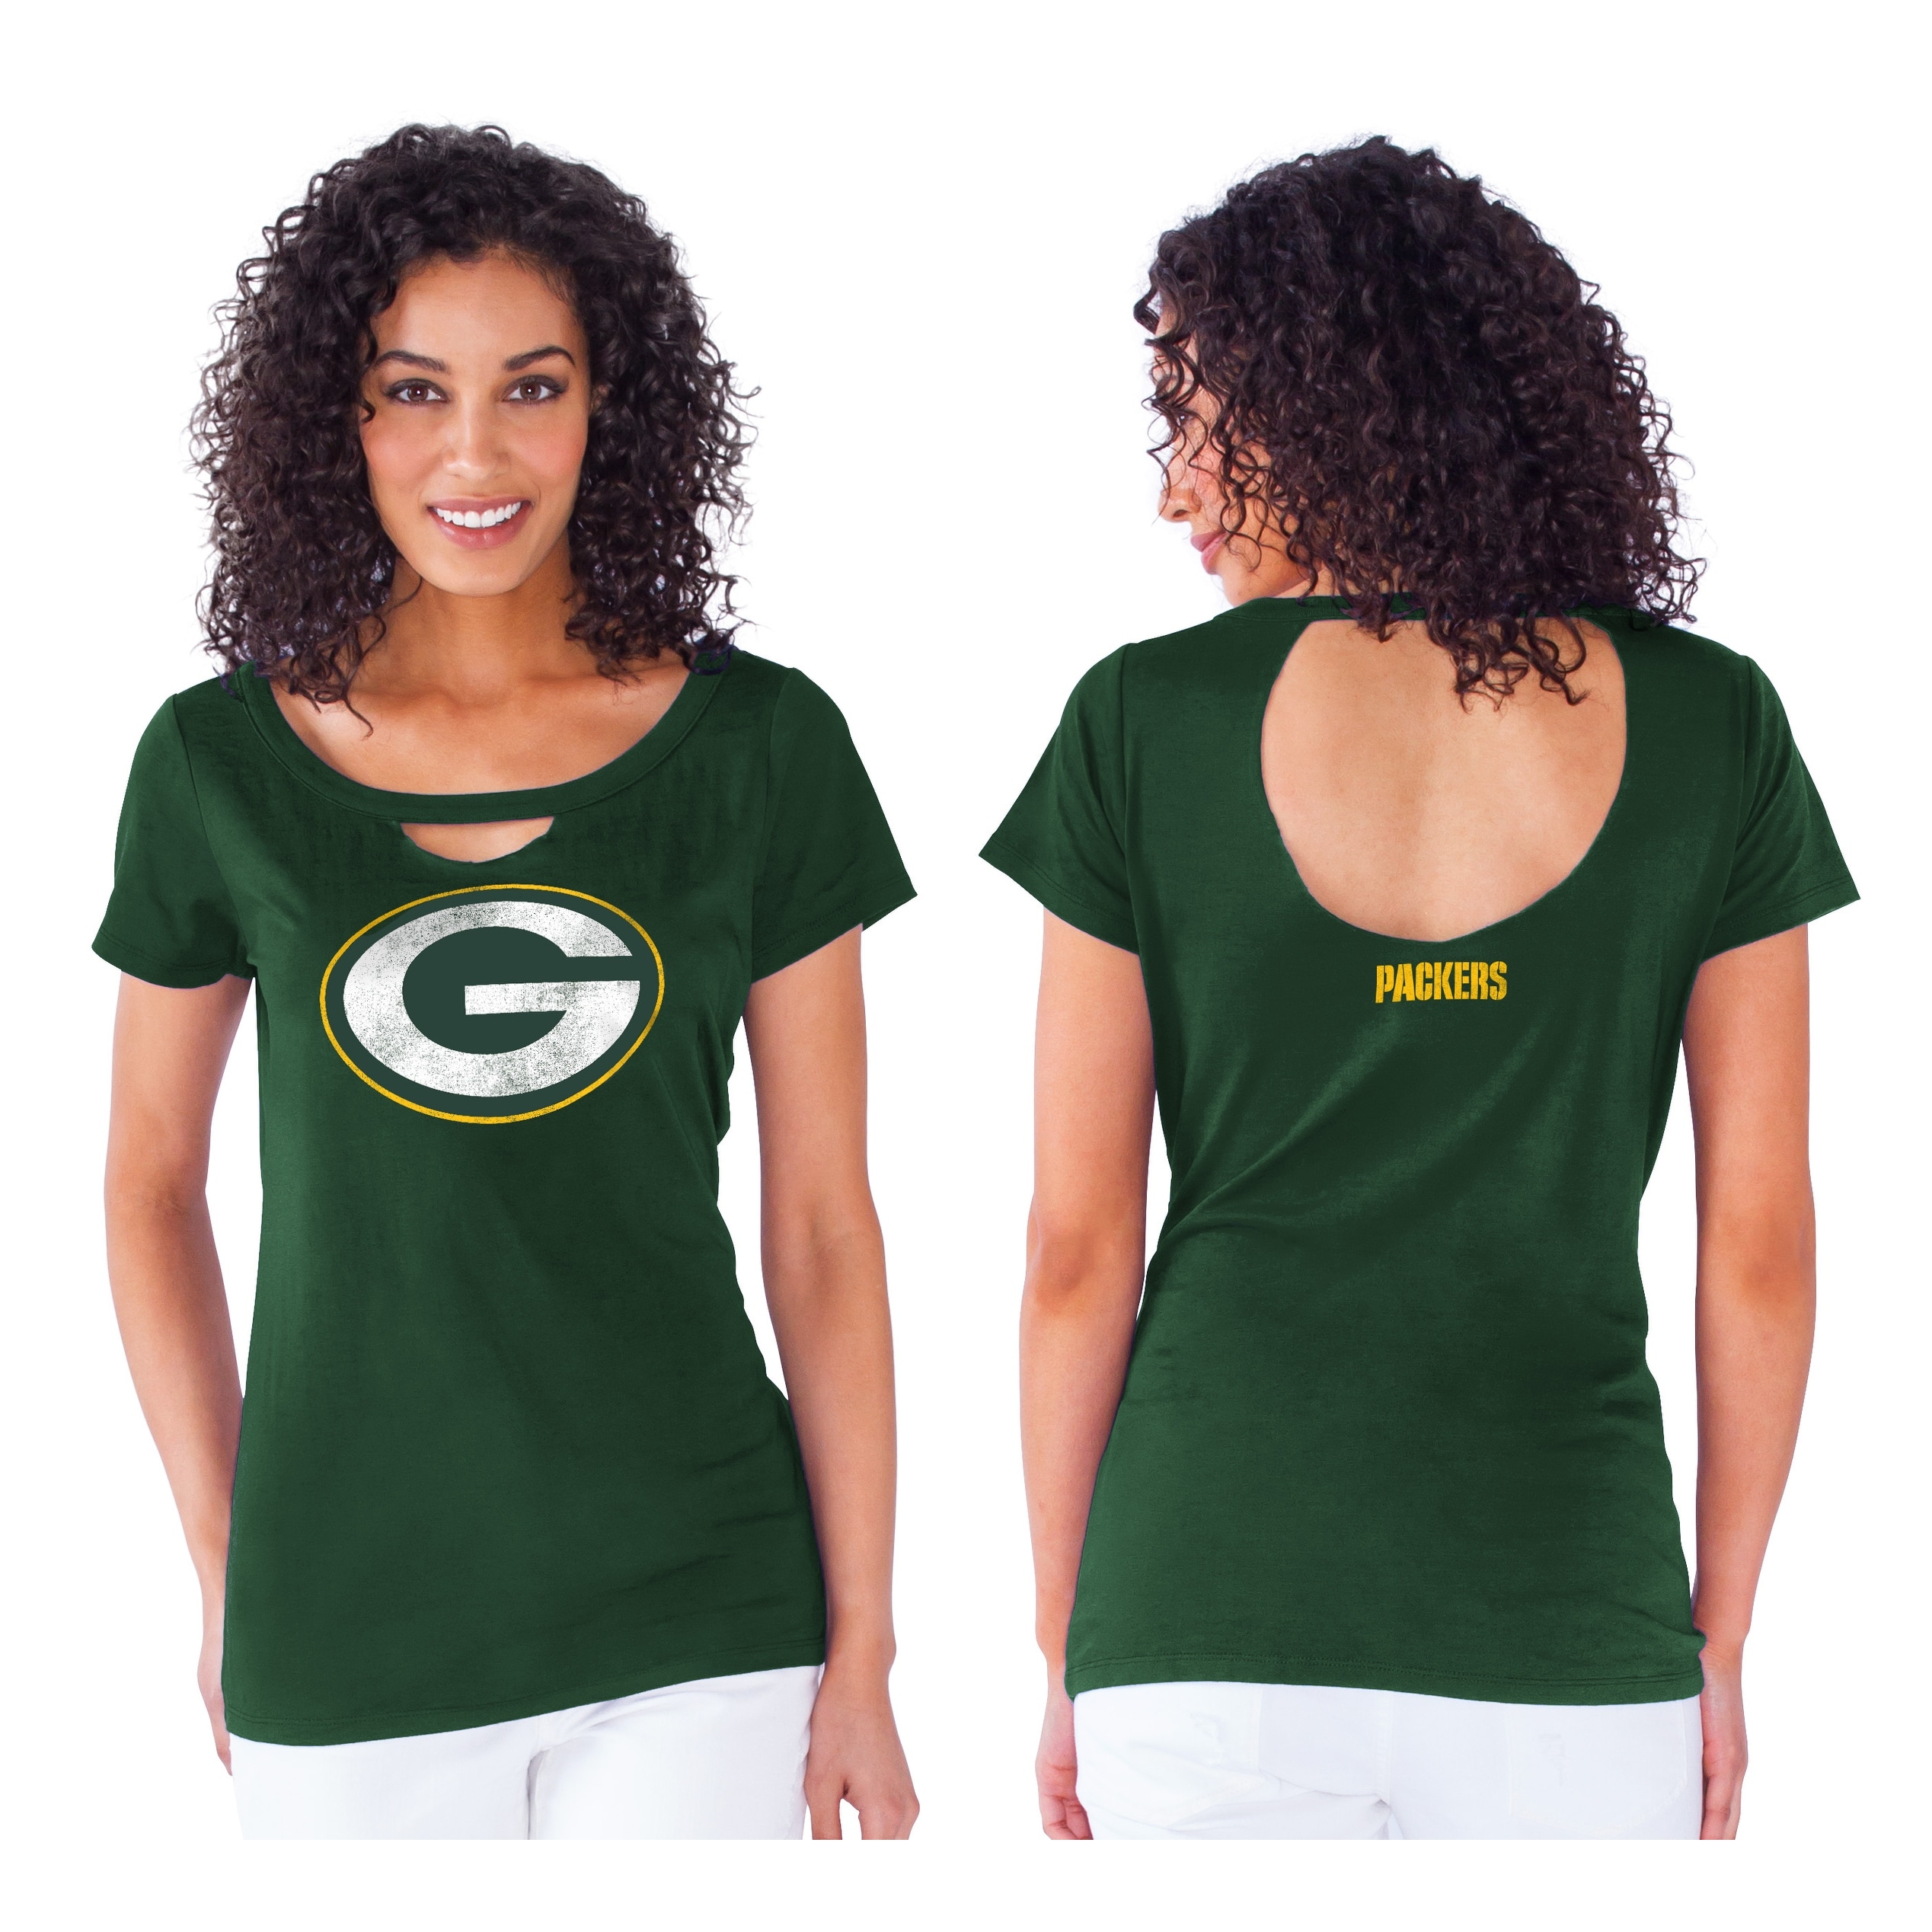 ladies green bay packers jersey